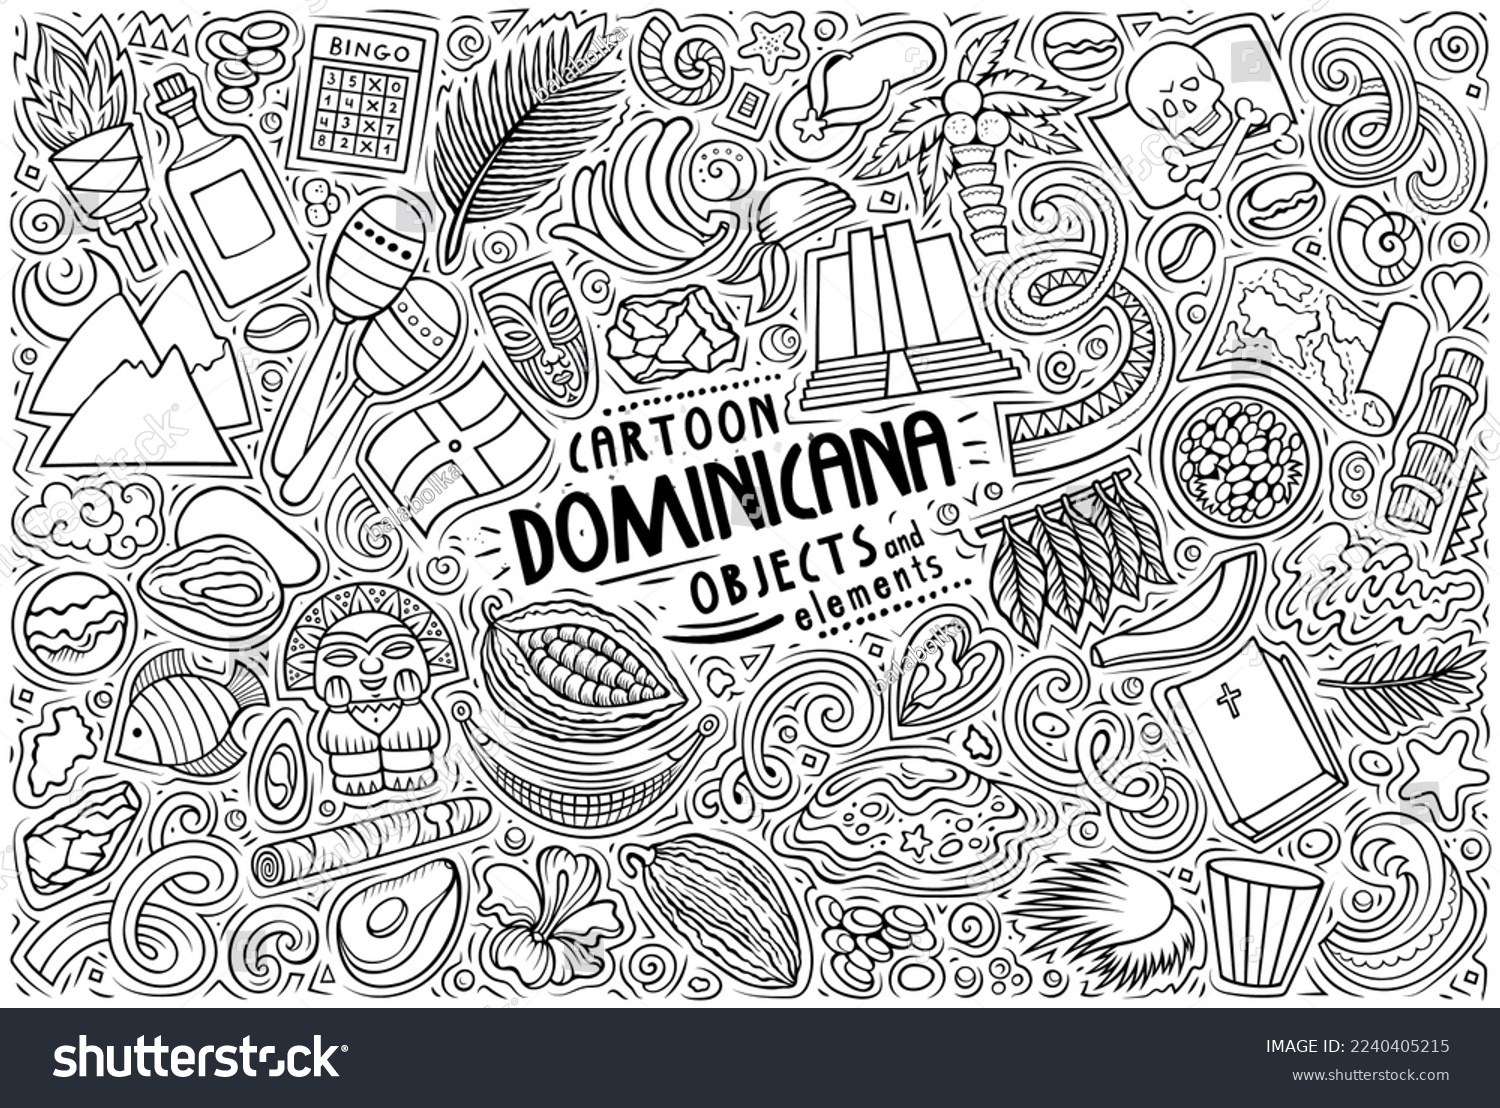 Cartoon vector doodle set of Dominican Republic traditional symbols, items and objects #2240405215